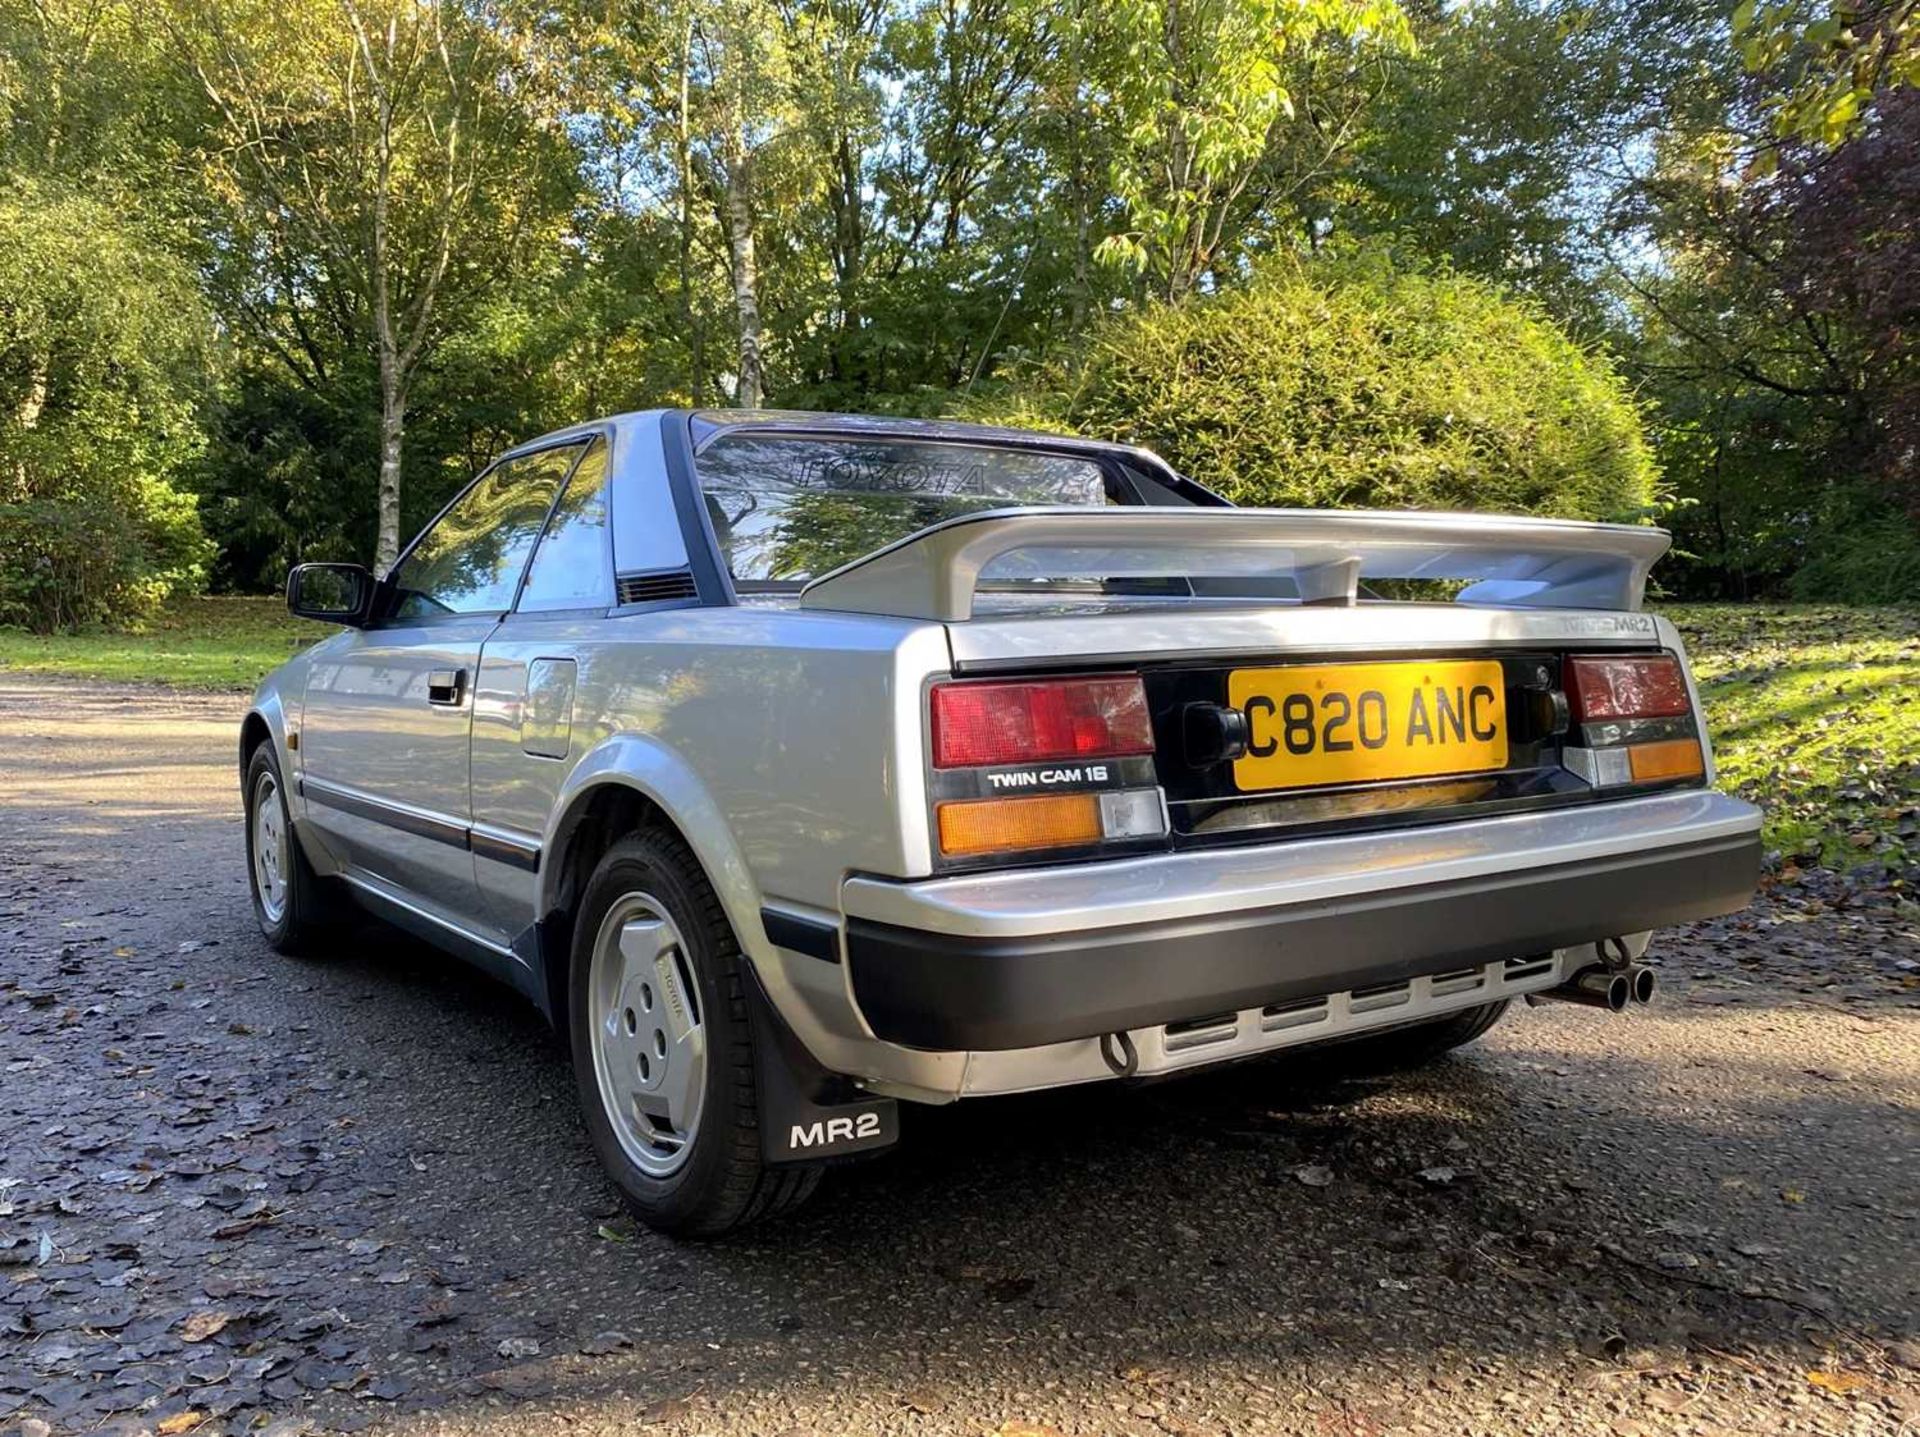 1985 Toyota MR2 Coupe Restored example of an appreciating modern classic - Image 23 of 100